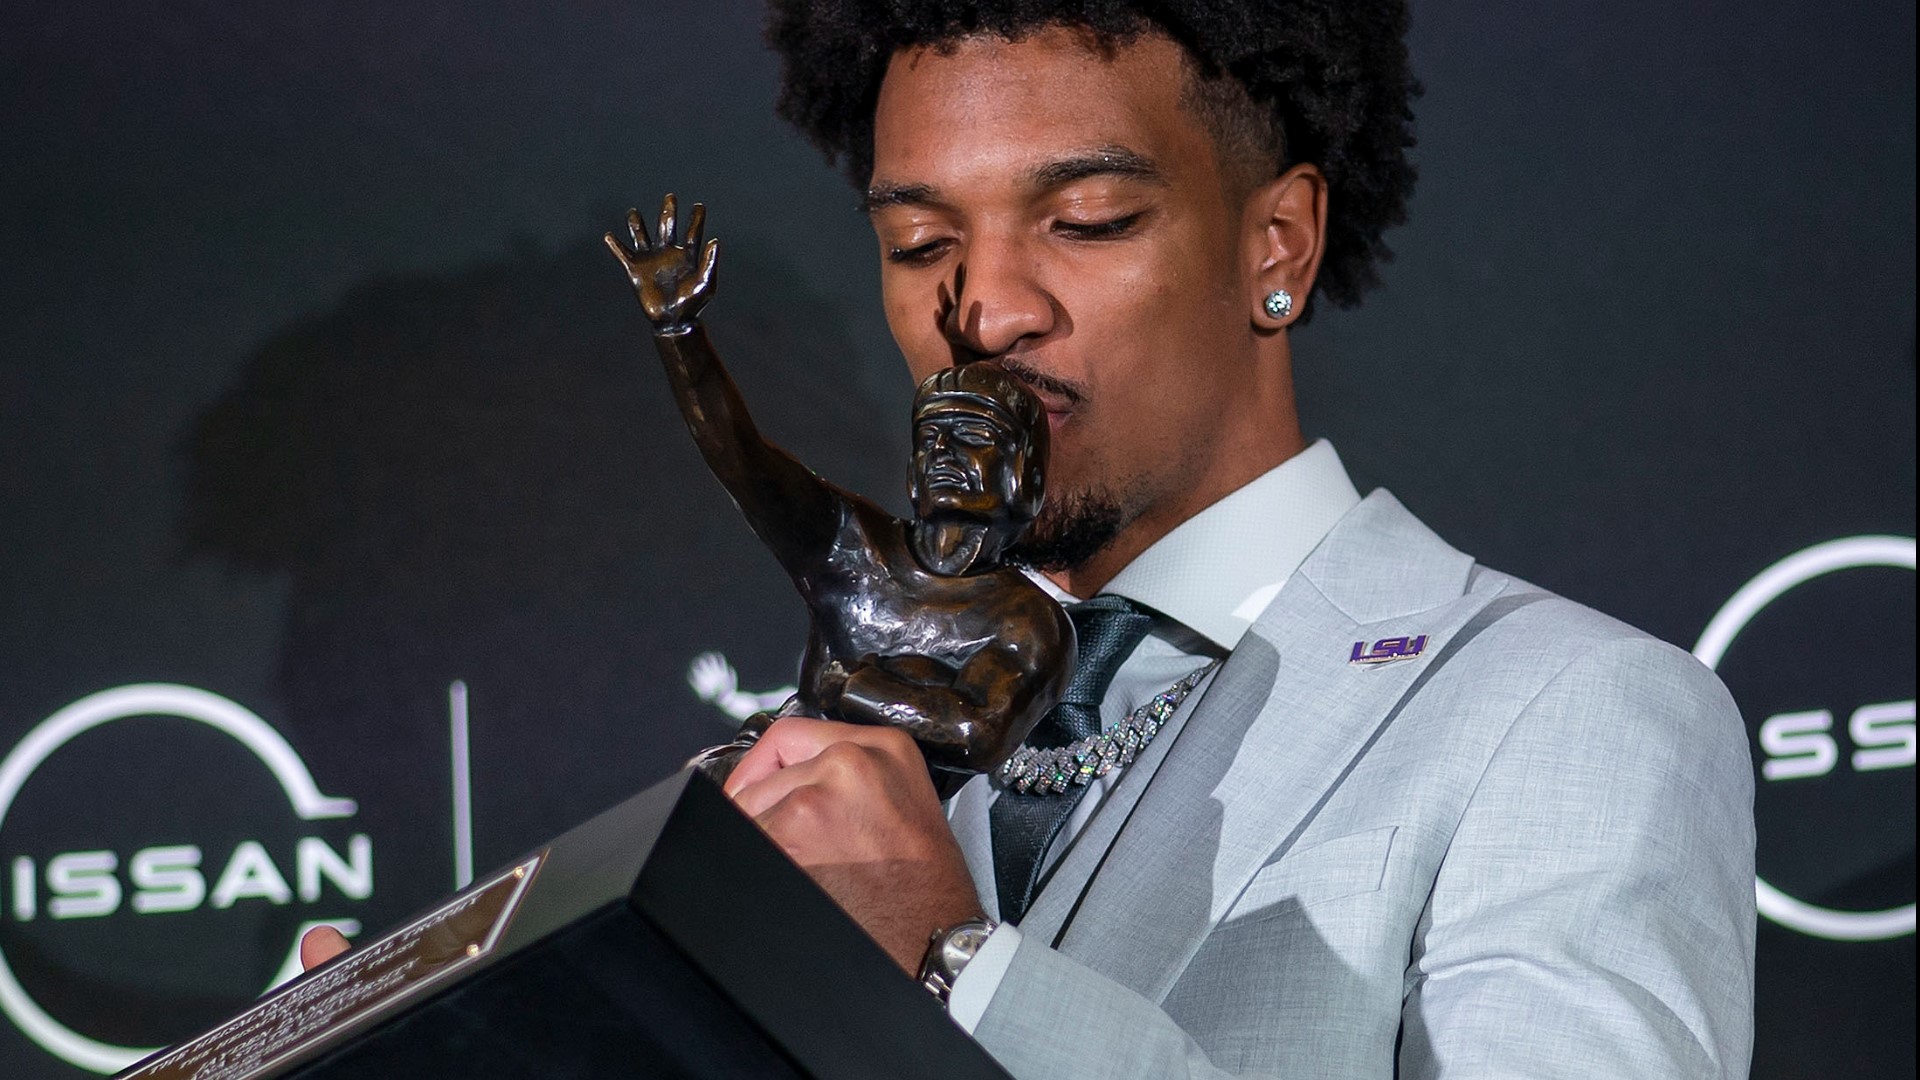 Daniels revealed he slept next to the Heisman the night he won.